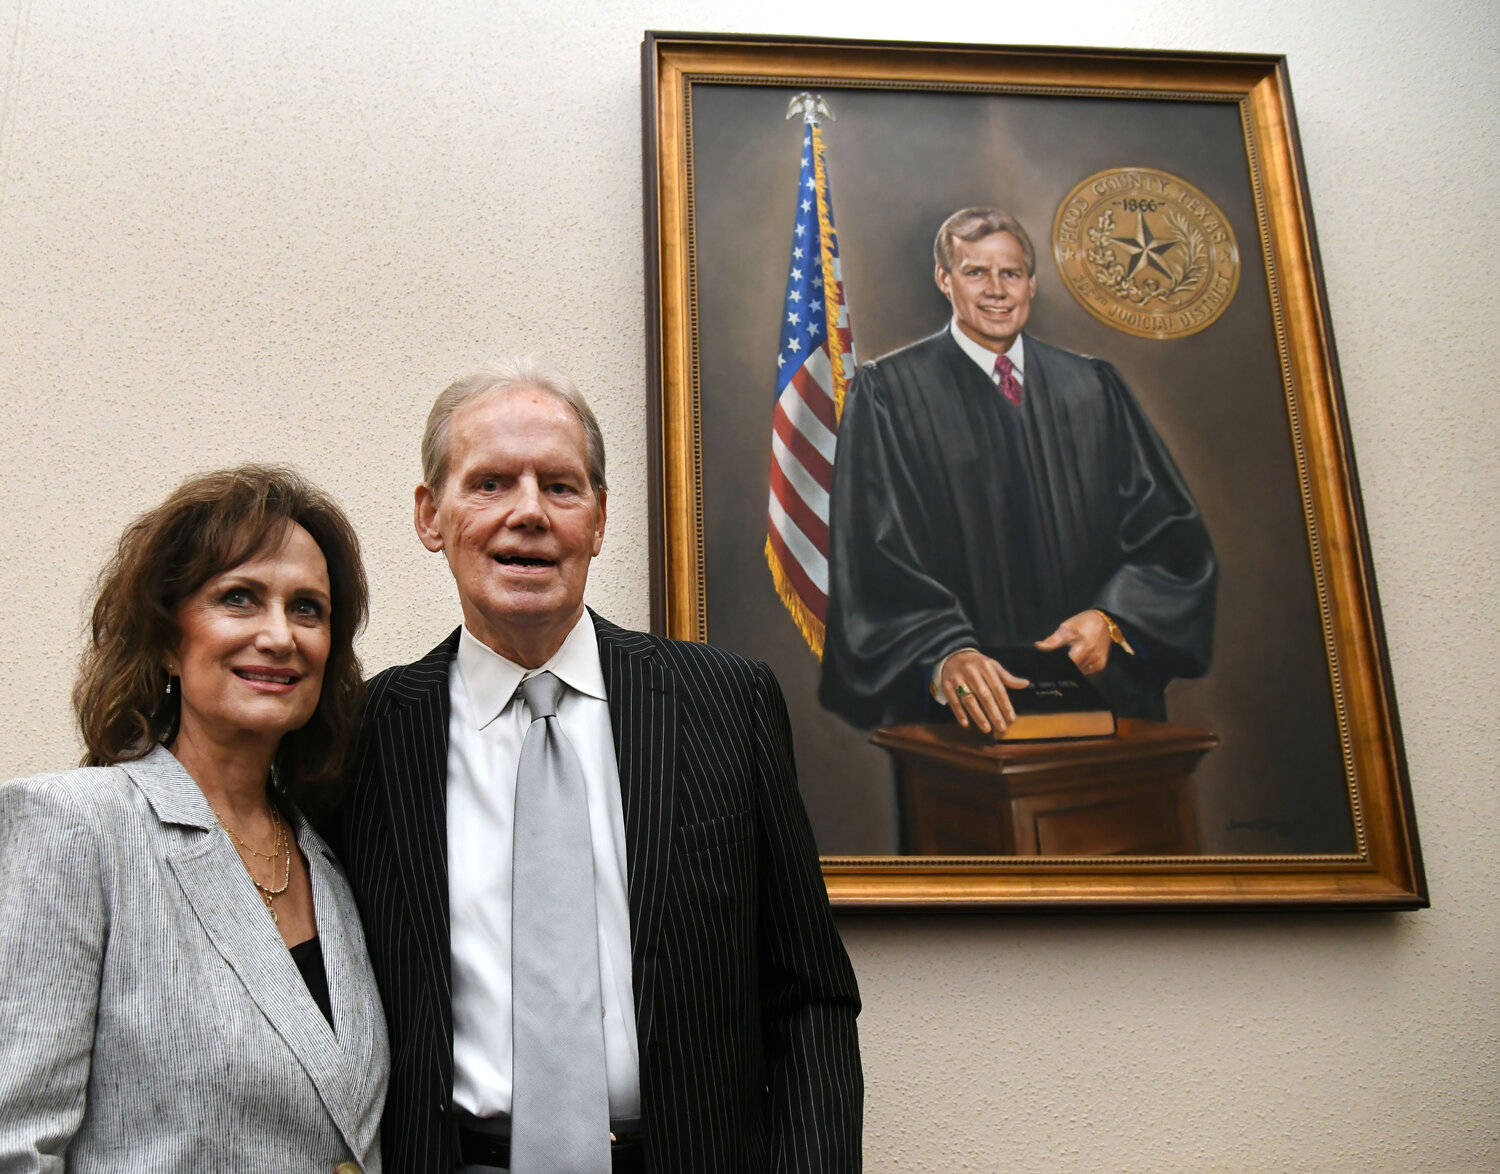 Former Hood County District Judge Ralph Walton, right, poses with his wife, Patsy Walton, in front of a portrait painted by local artist James Spurlock.